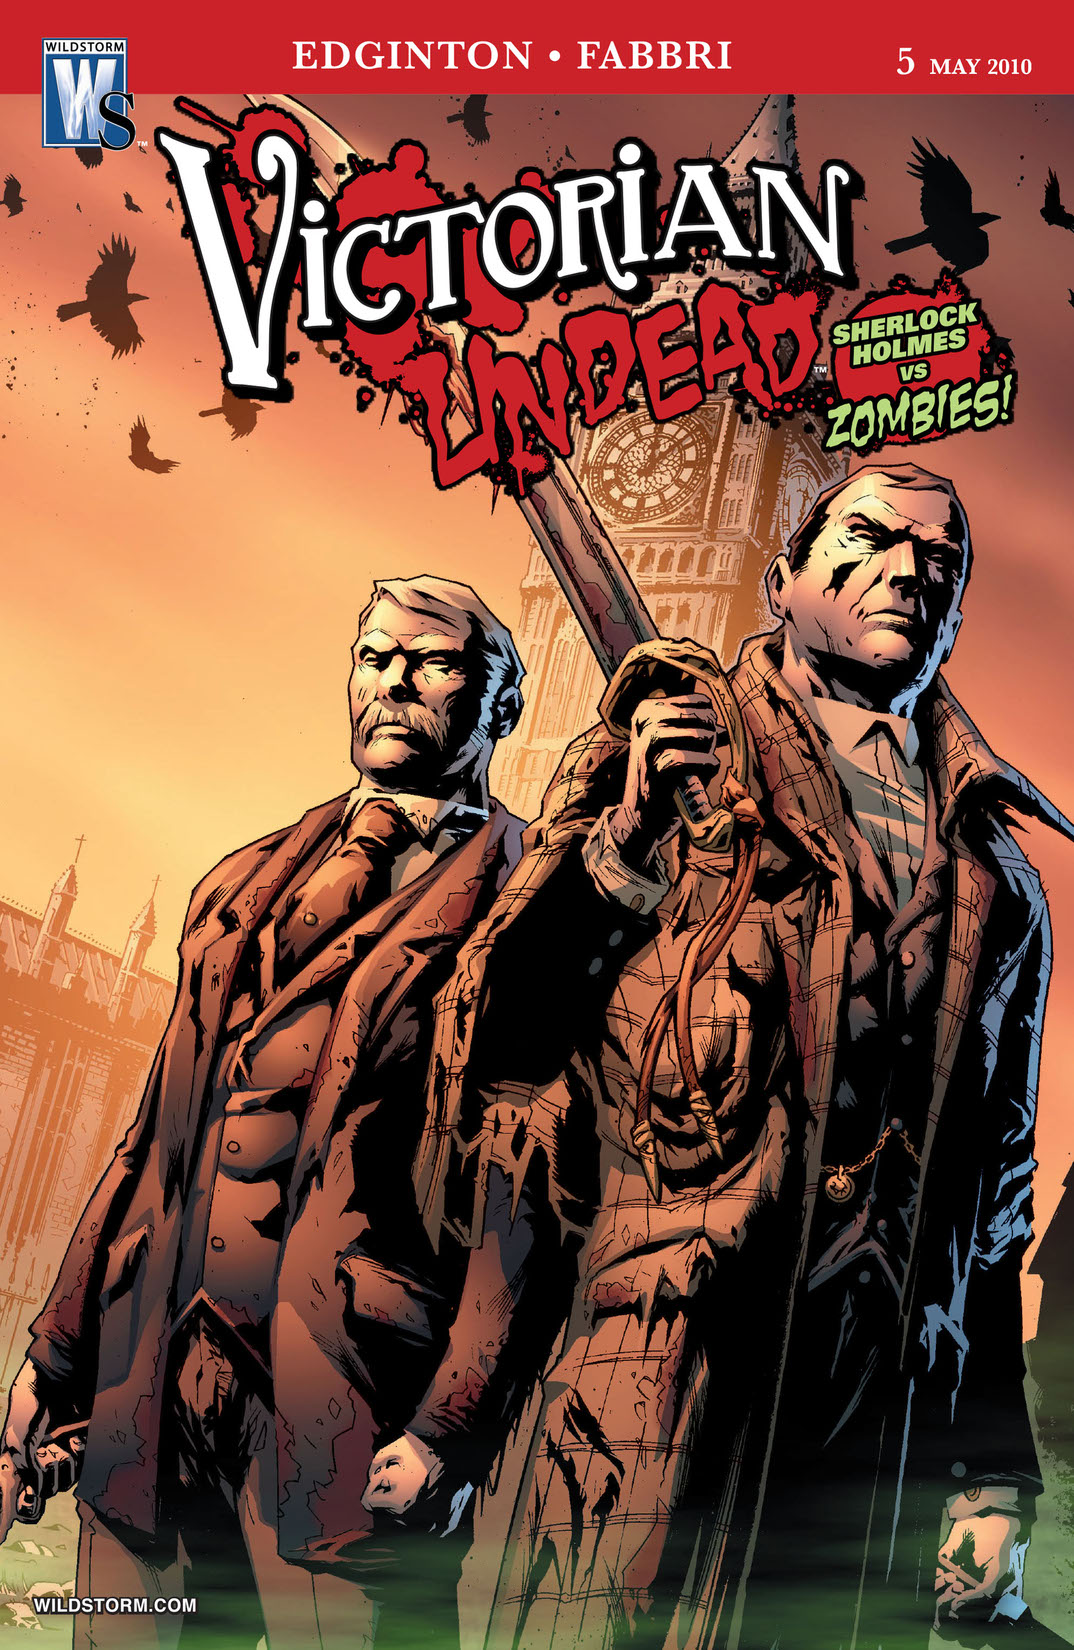 Victorian Undead #5 preview images